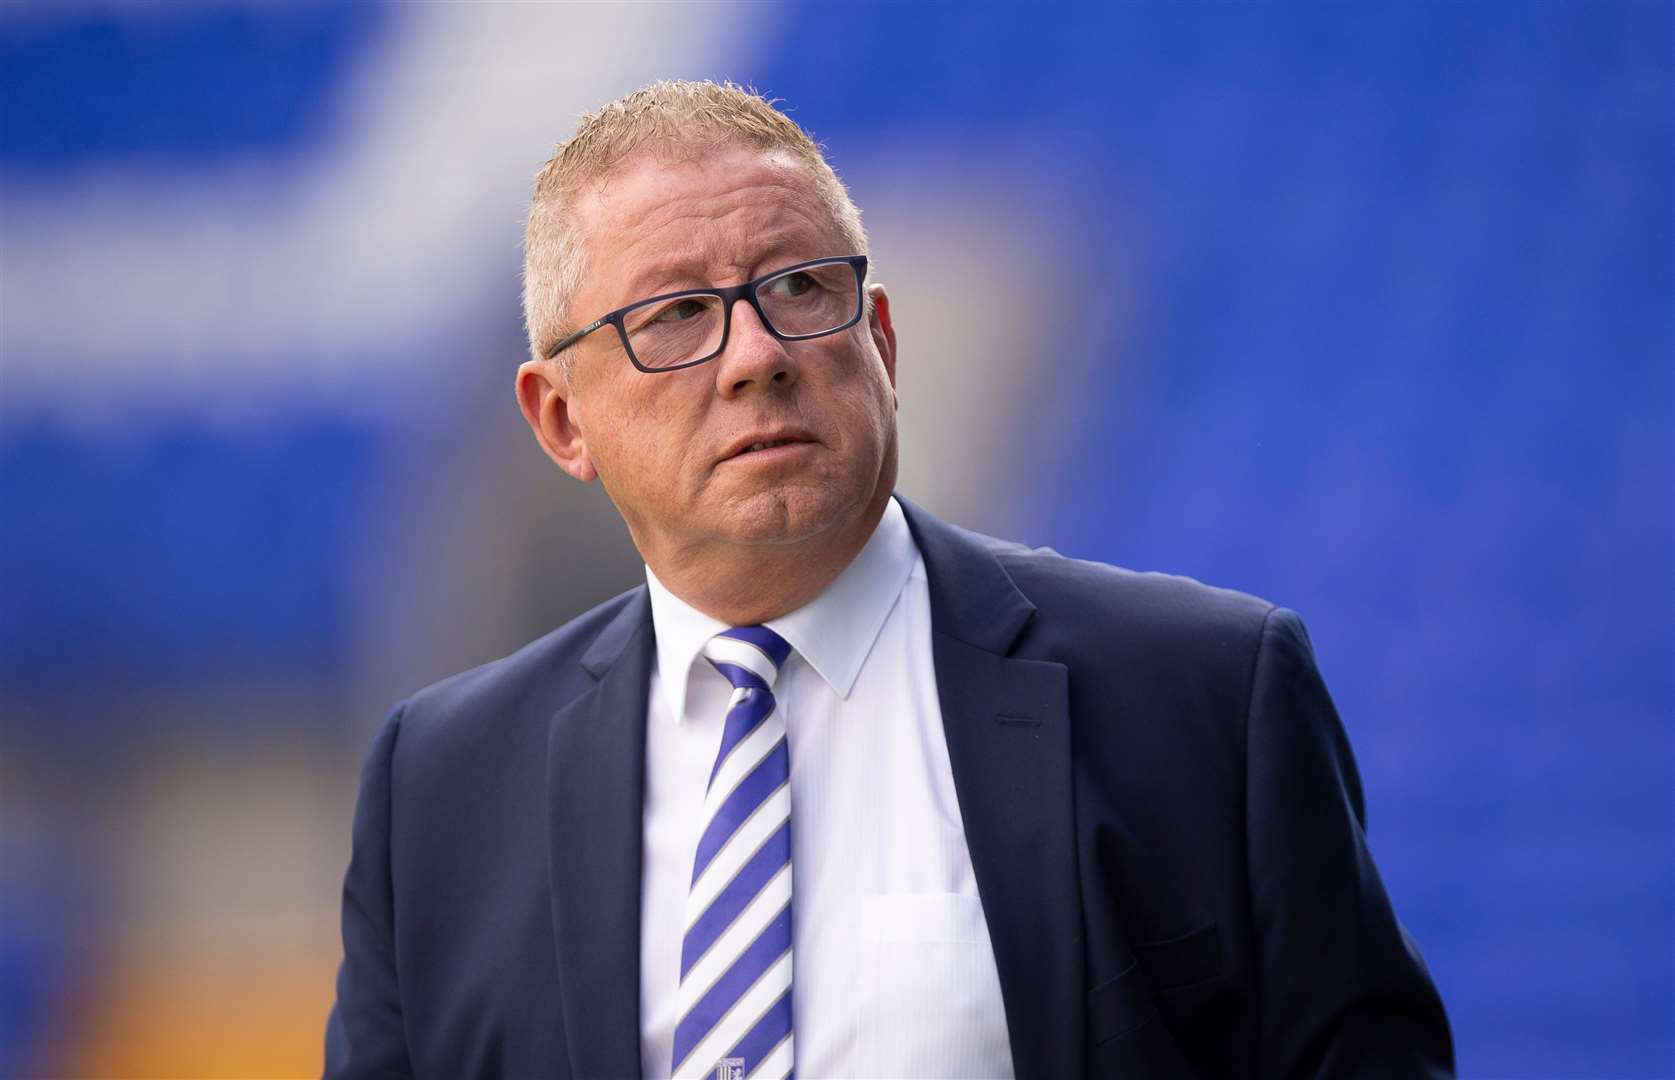 Gillingham chairman Paul Scally angered as his young daughter is targeted with abuse